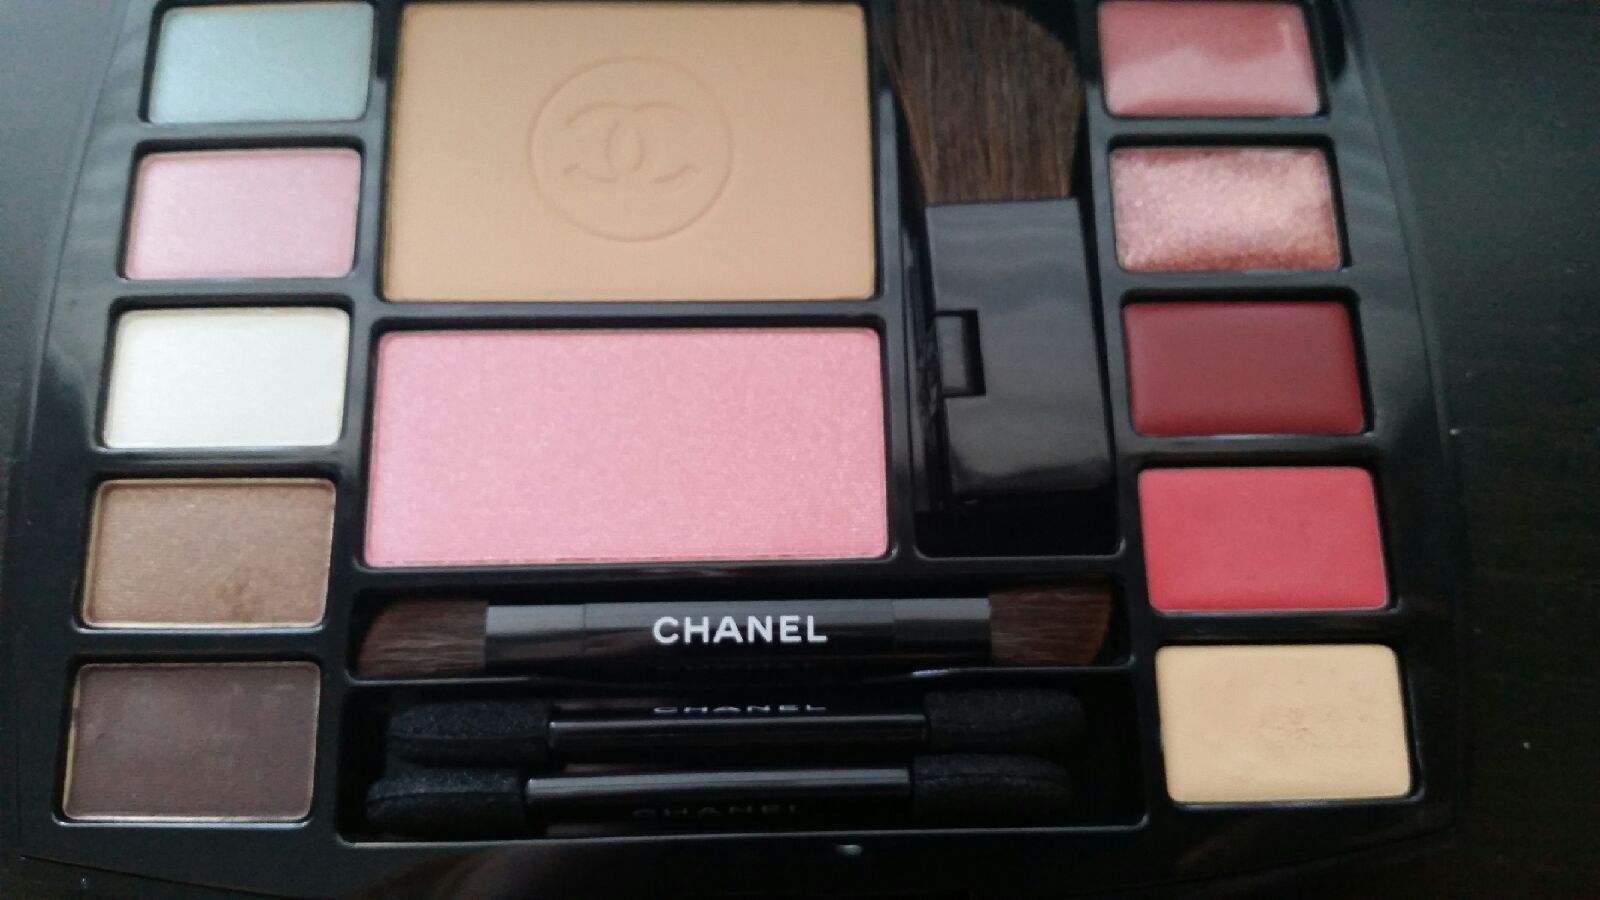 CHANEL Travel Makeup Palette ALTITUDE Makeup Essentials with Travel Mascara